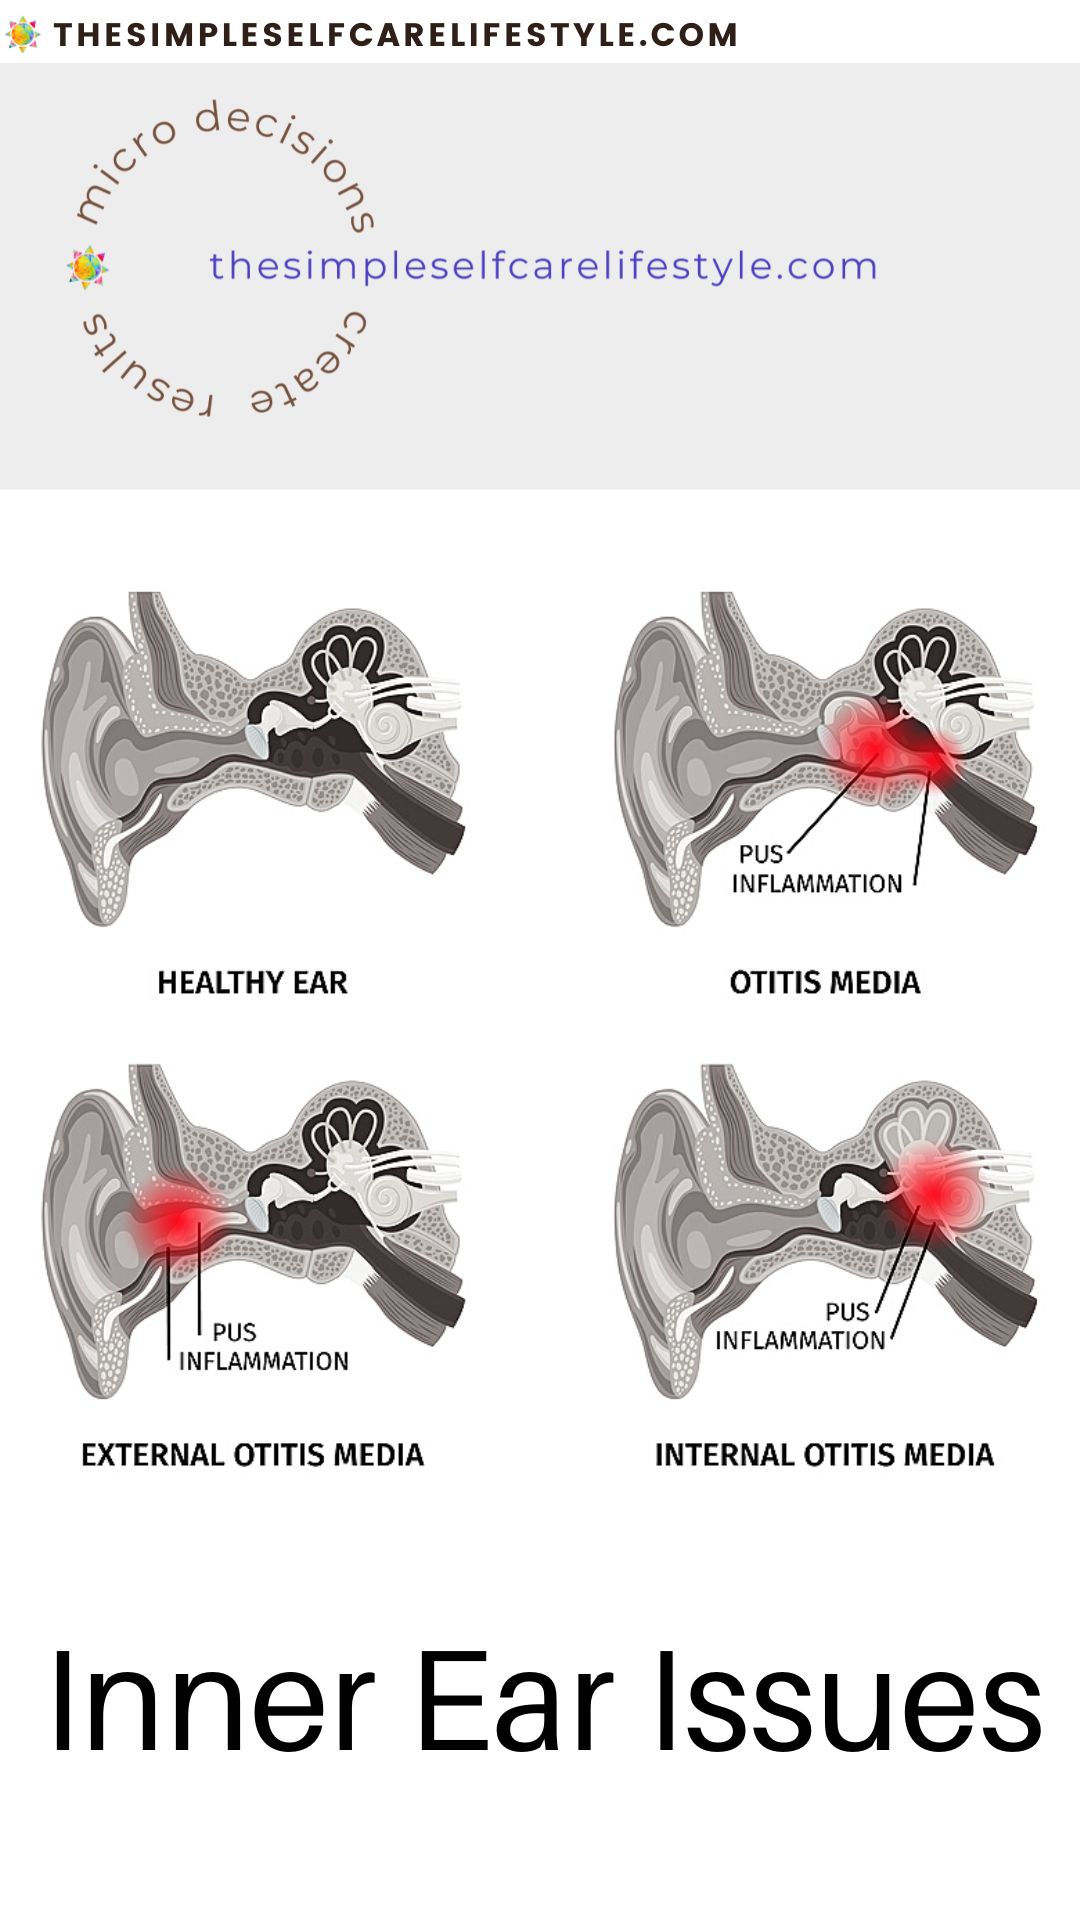 what helps for vertigo can be helped by knowing inner ear issues here are photos of cross section of ear canal. 4 Different illustrations Each with red circle showing where the infection and inflammation that can cause Vertigo is. This info helps 